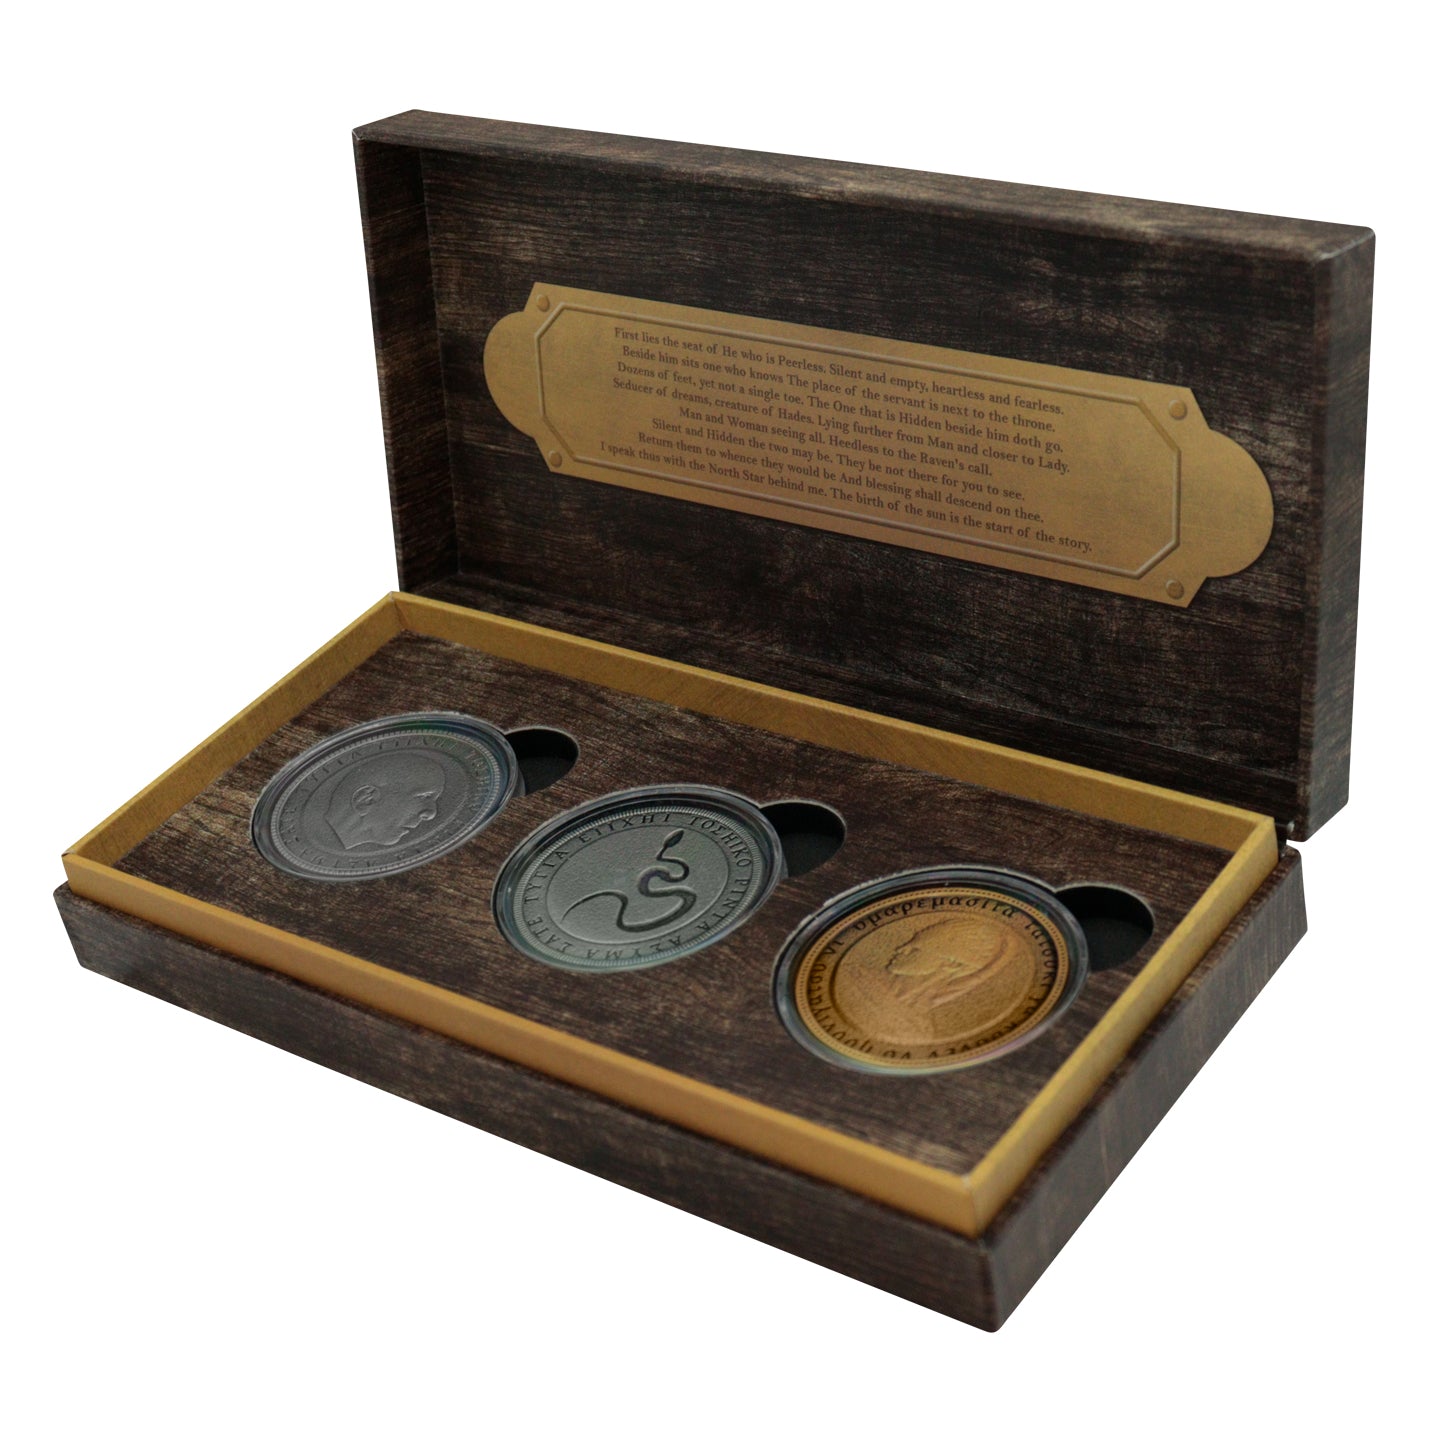 Silent Hill Limited Edition Room 105 Puzzle Set of Coins